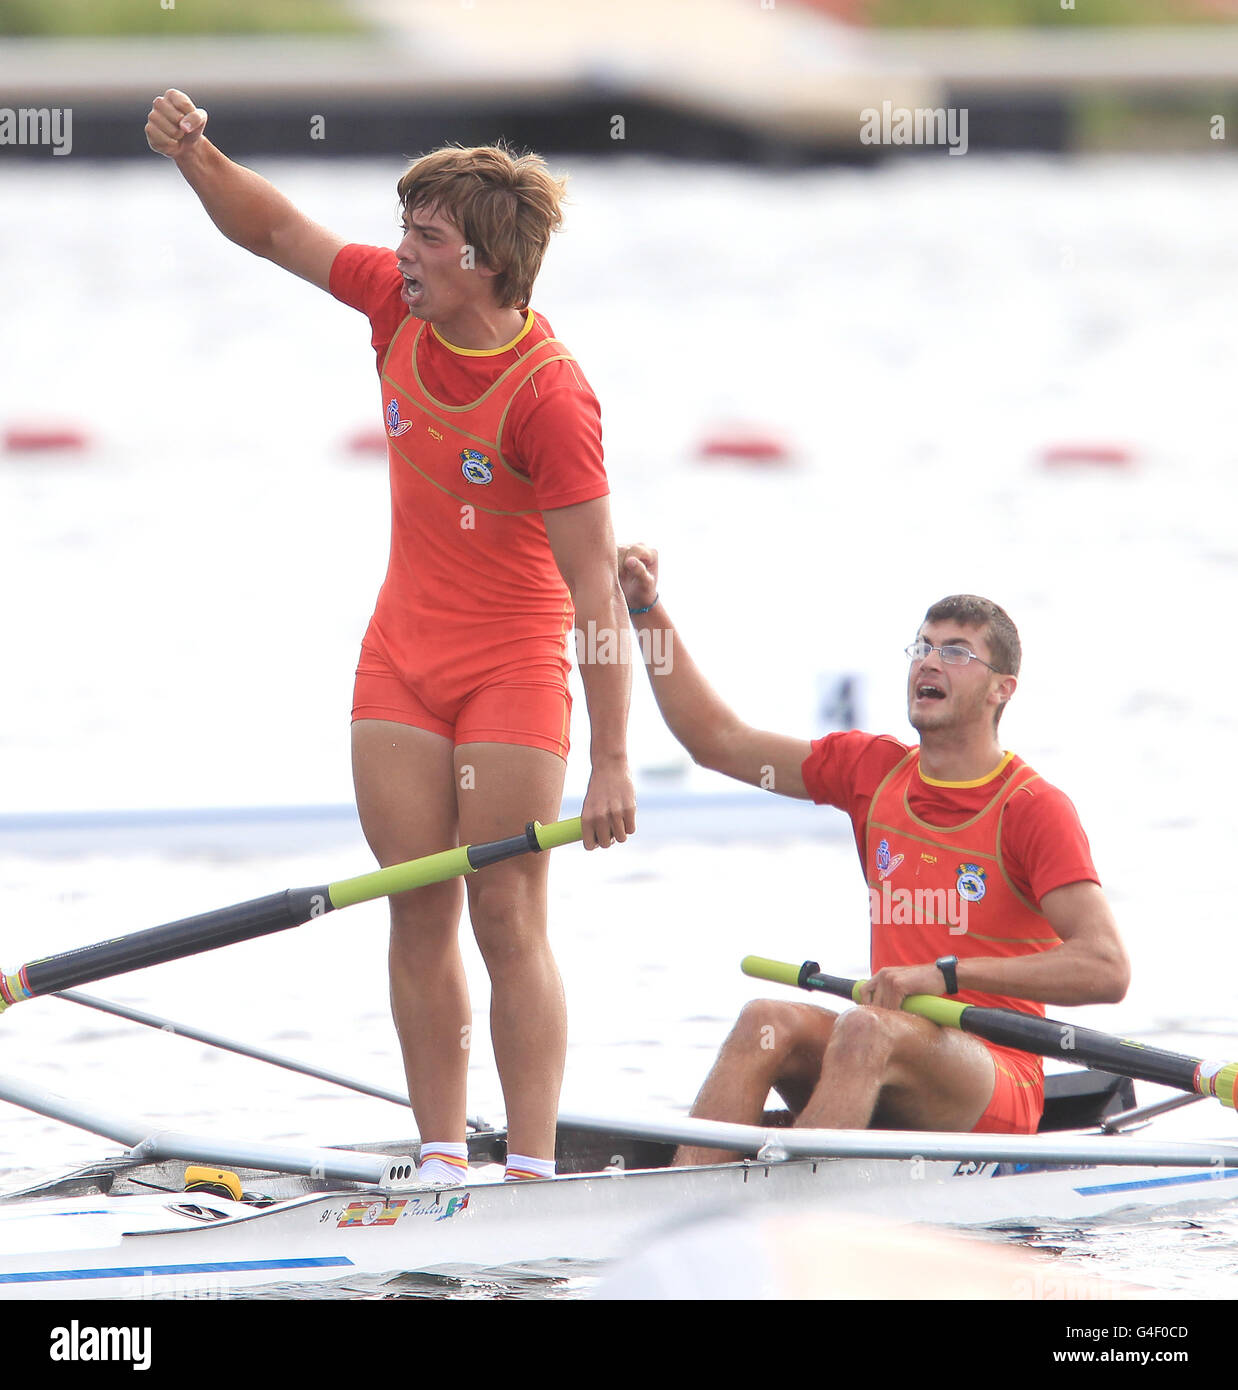 Rowing - Junior World Rowing Championships and Olympic Test Event - Day Four - Eton Dorney Rowing Lake. Spain's Alvaro Garcia Romero and Alejandro Lomba Fernandez celebrate second in the Junior Men's Pairs Final Stock Photo